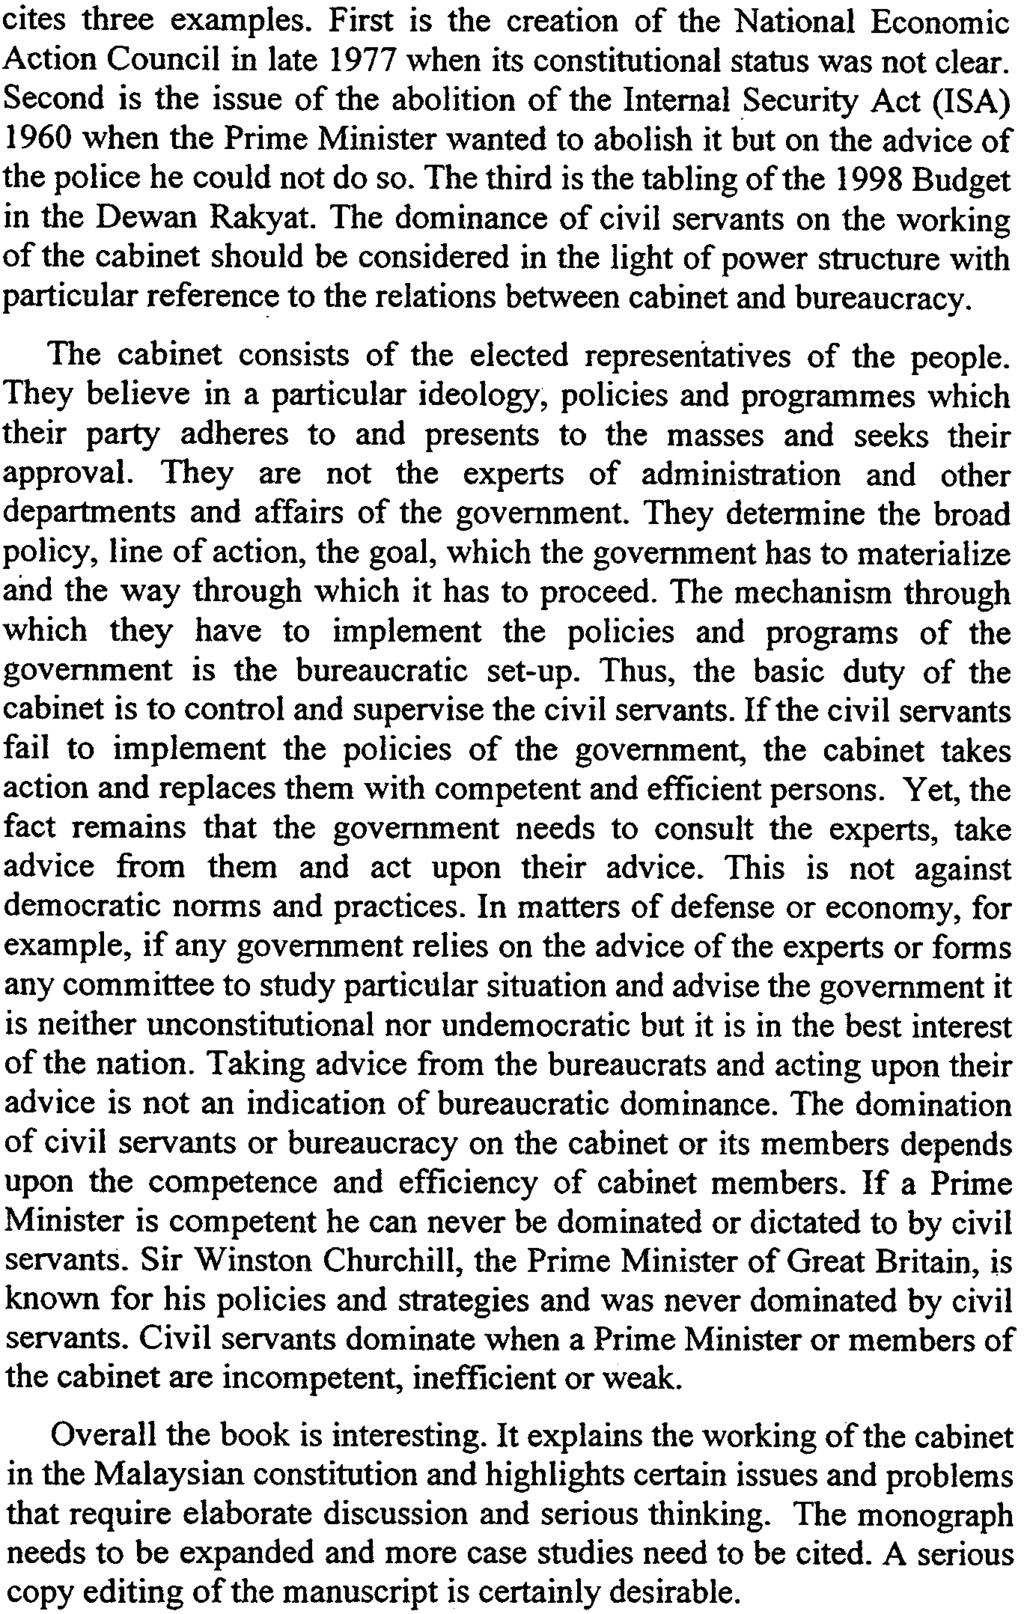 [250] INTELLECTUAL DISCOURSE, VOL 8, No 2,2000 cites three examples. First is the creation of the National Economic Action Council in late 1977 when its constitutional status was not clear.